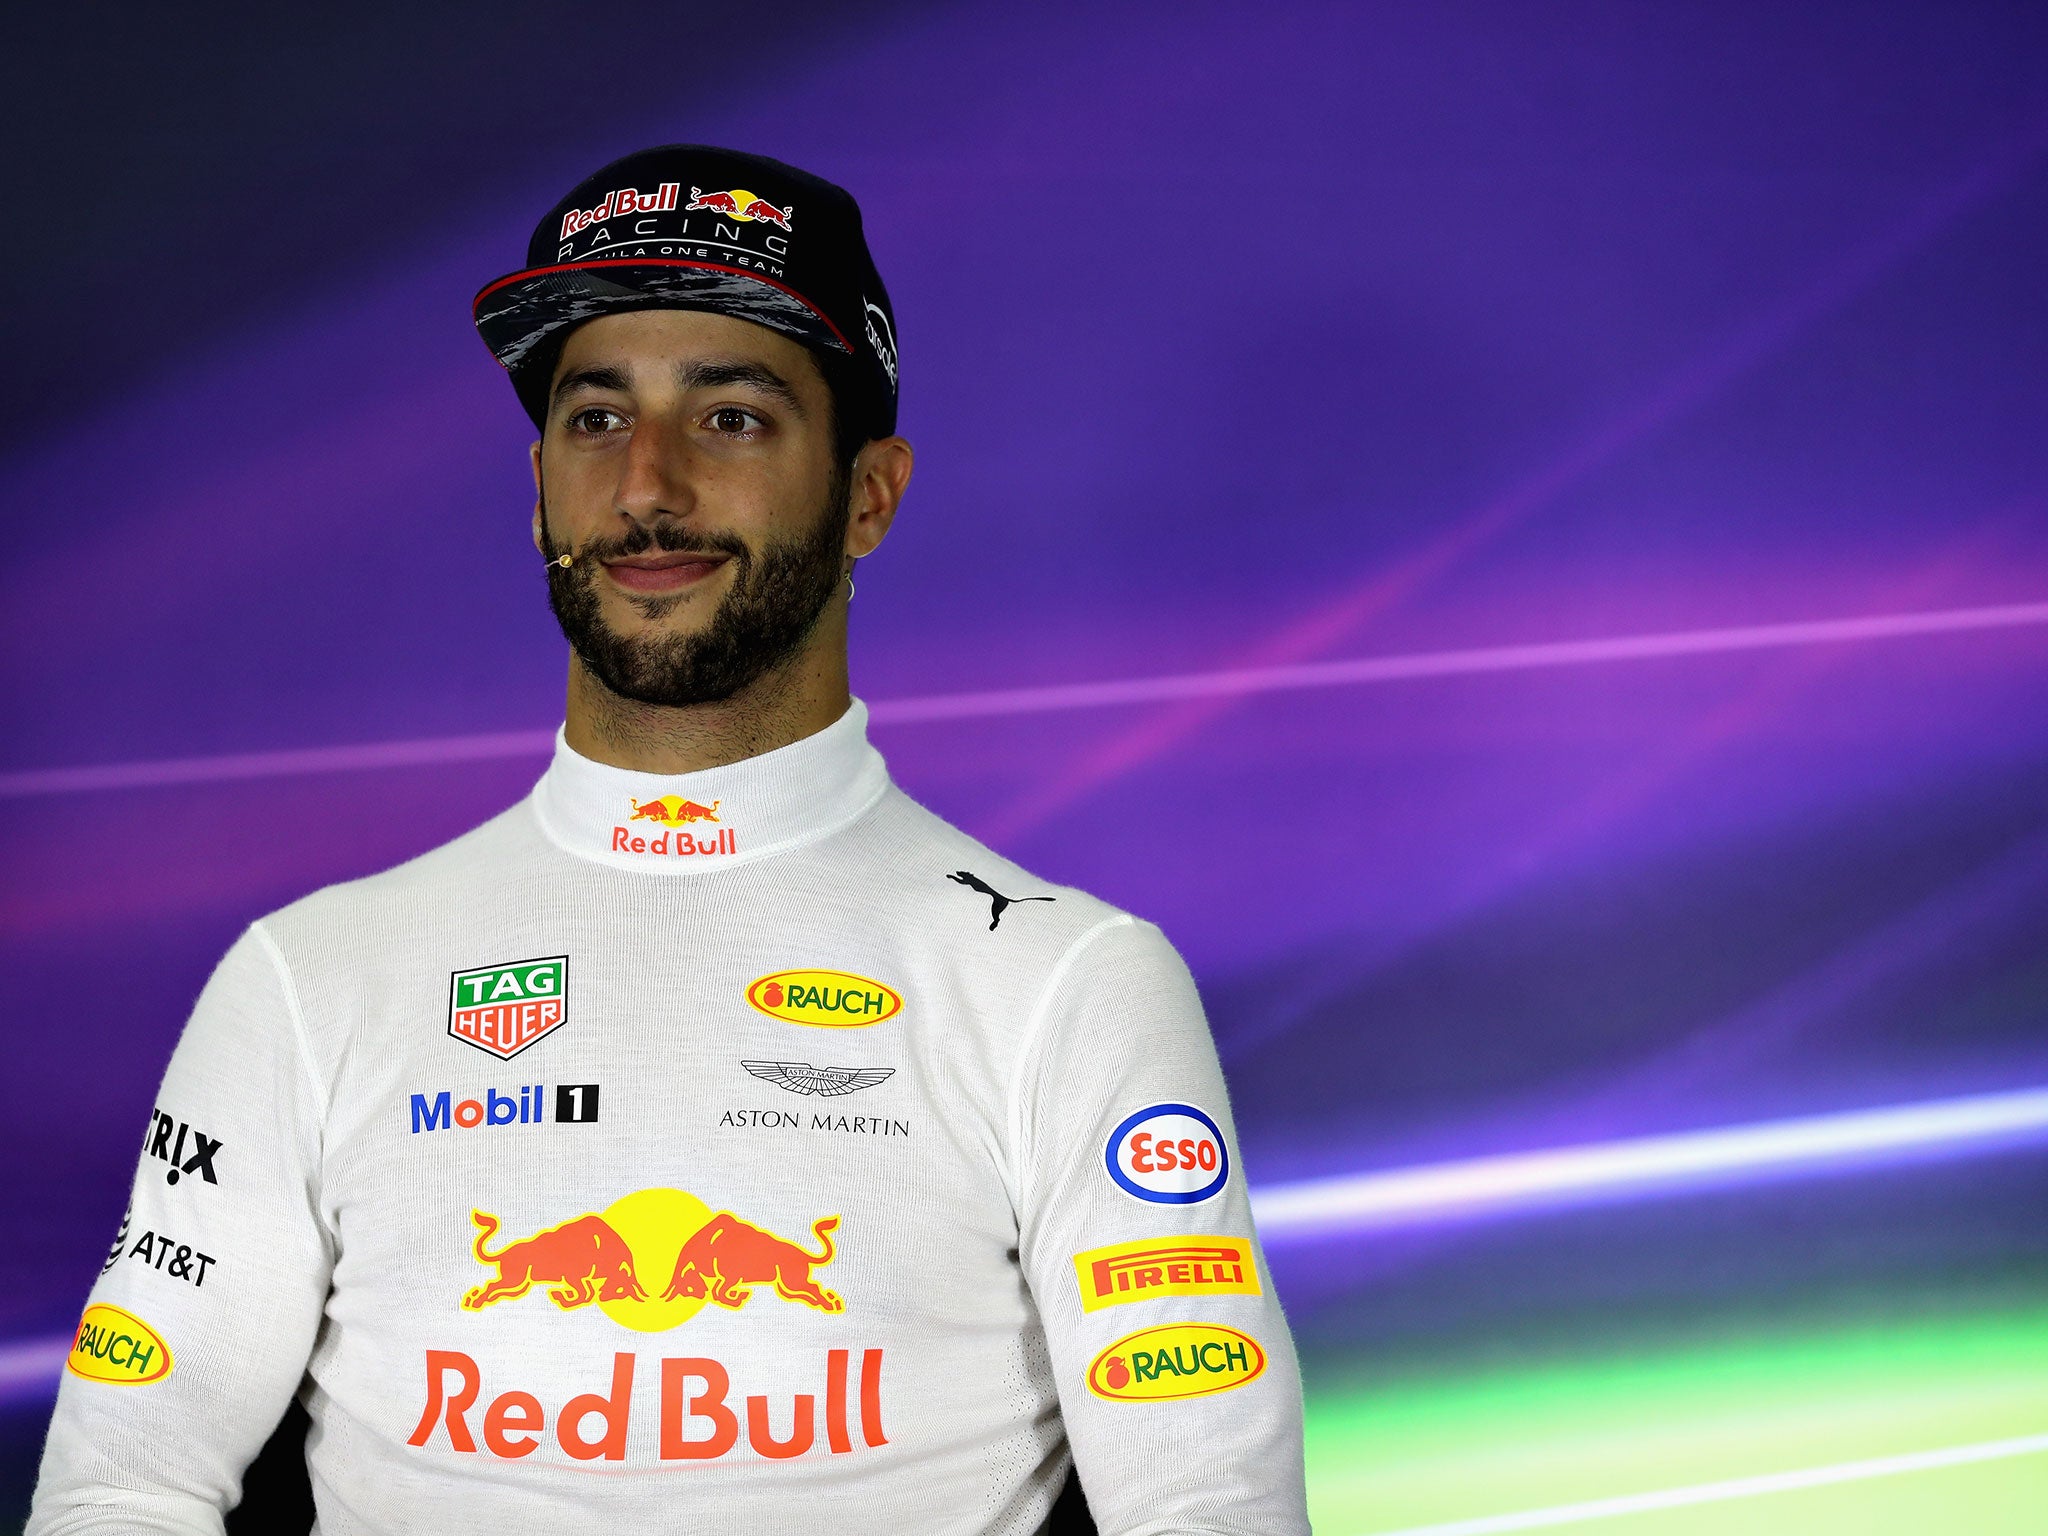 Daniel Ricciardo believes he has a strong chance at the Monaco Grand Prix this weekend